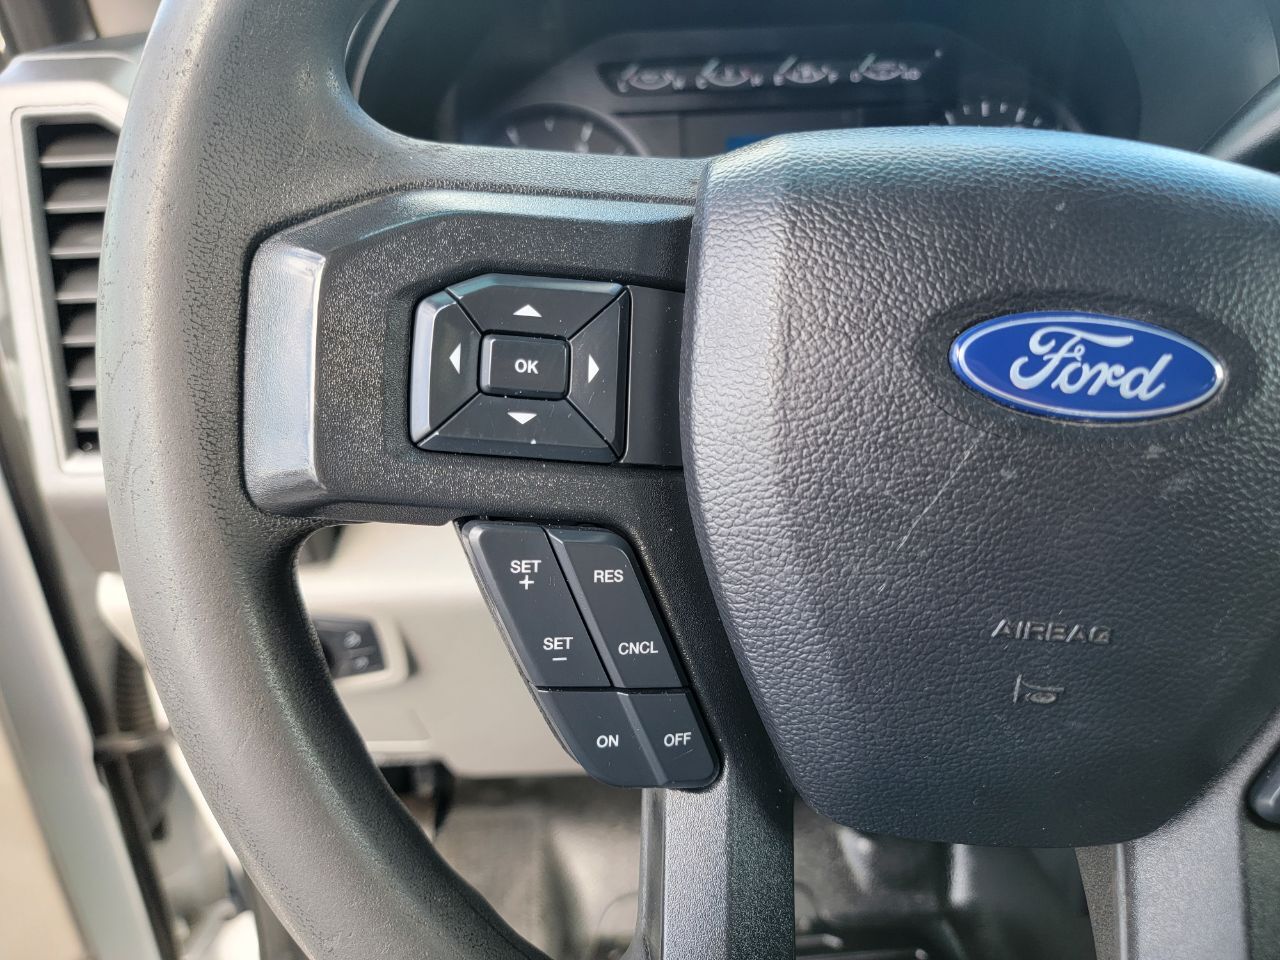 2019 FORD F-450 Incomplete - $39,900